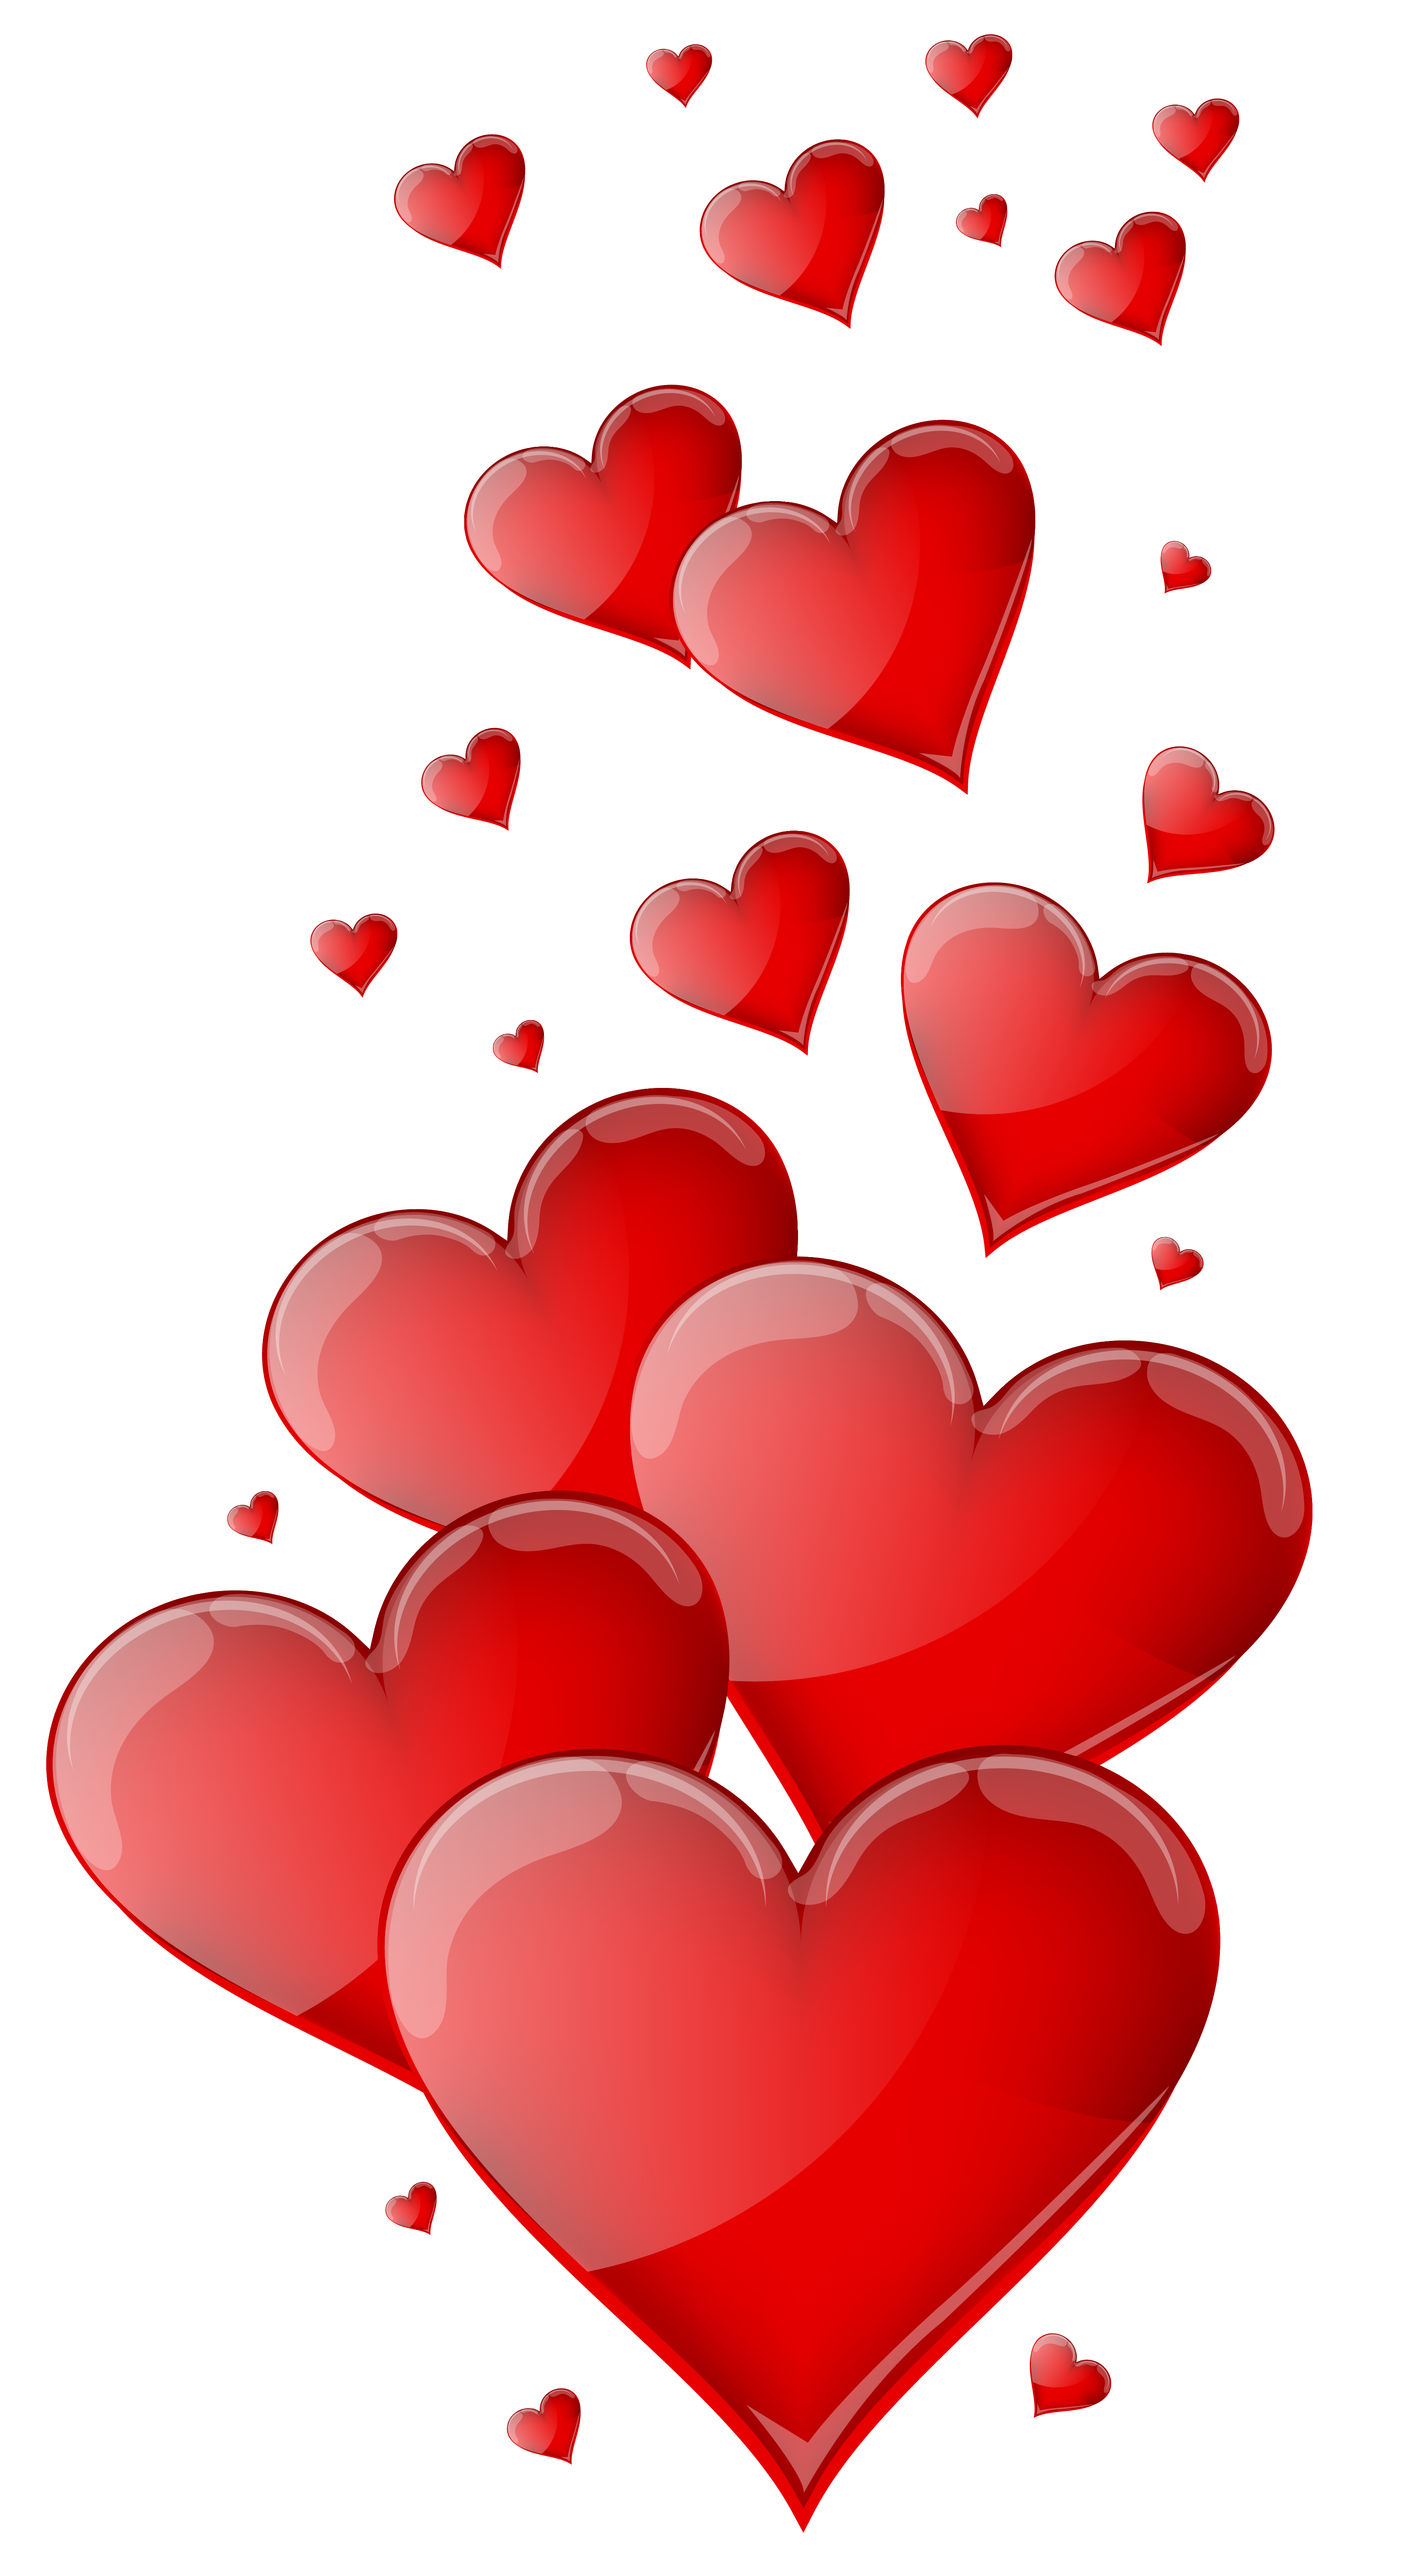 Heart Love Clip Art Red Hearts Png Clipart Image Png Download 3523